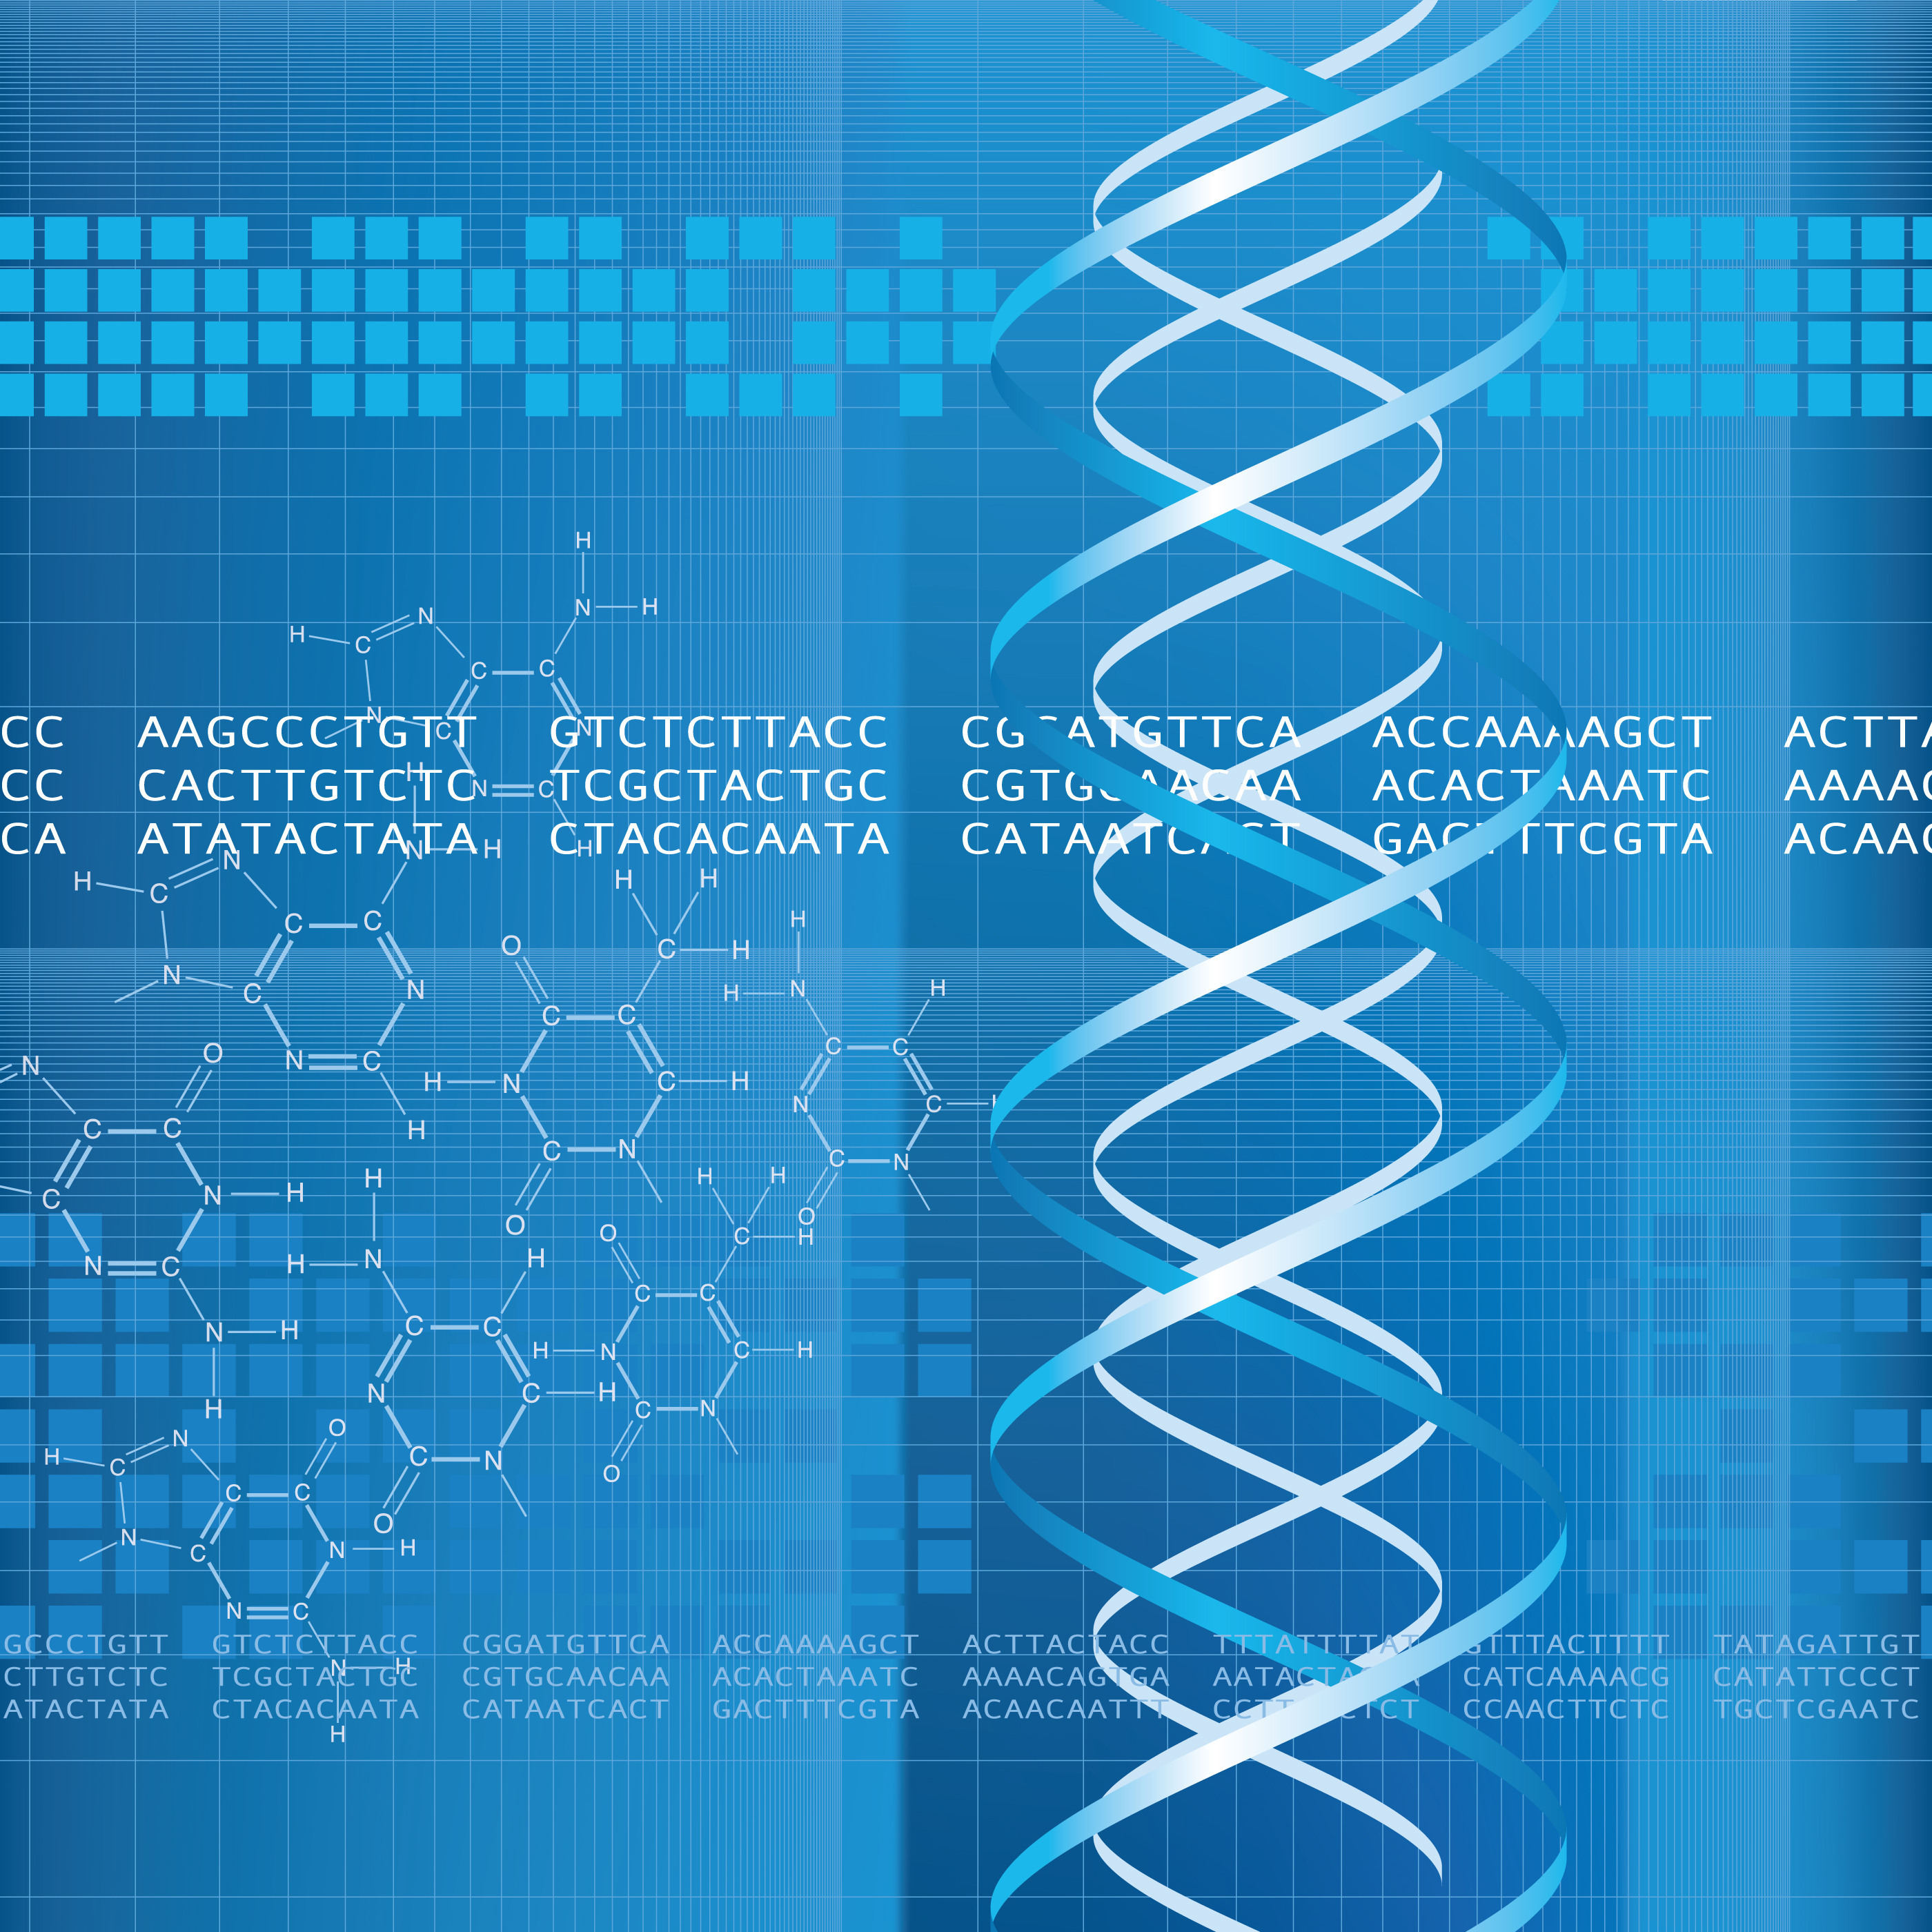 Dna sequencing research paper